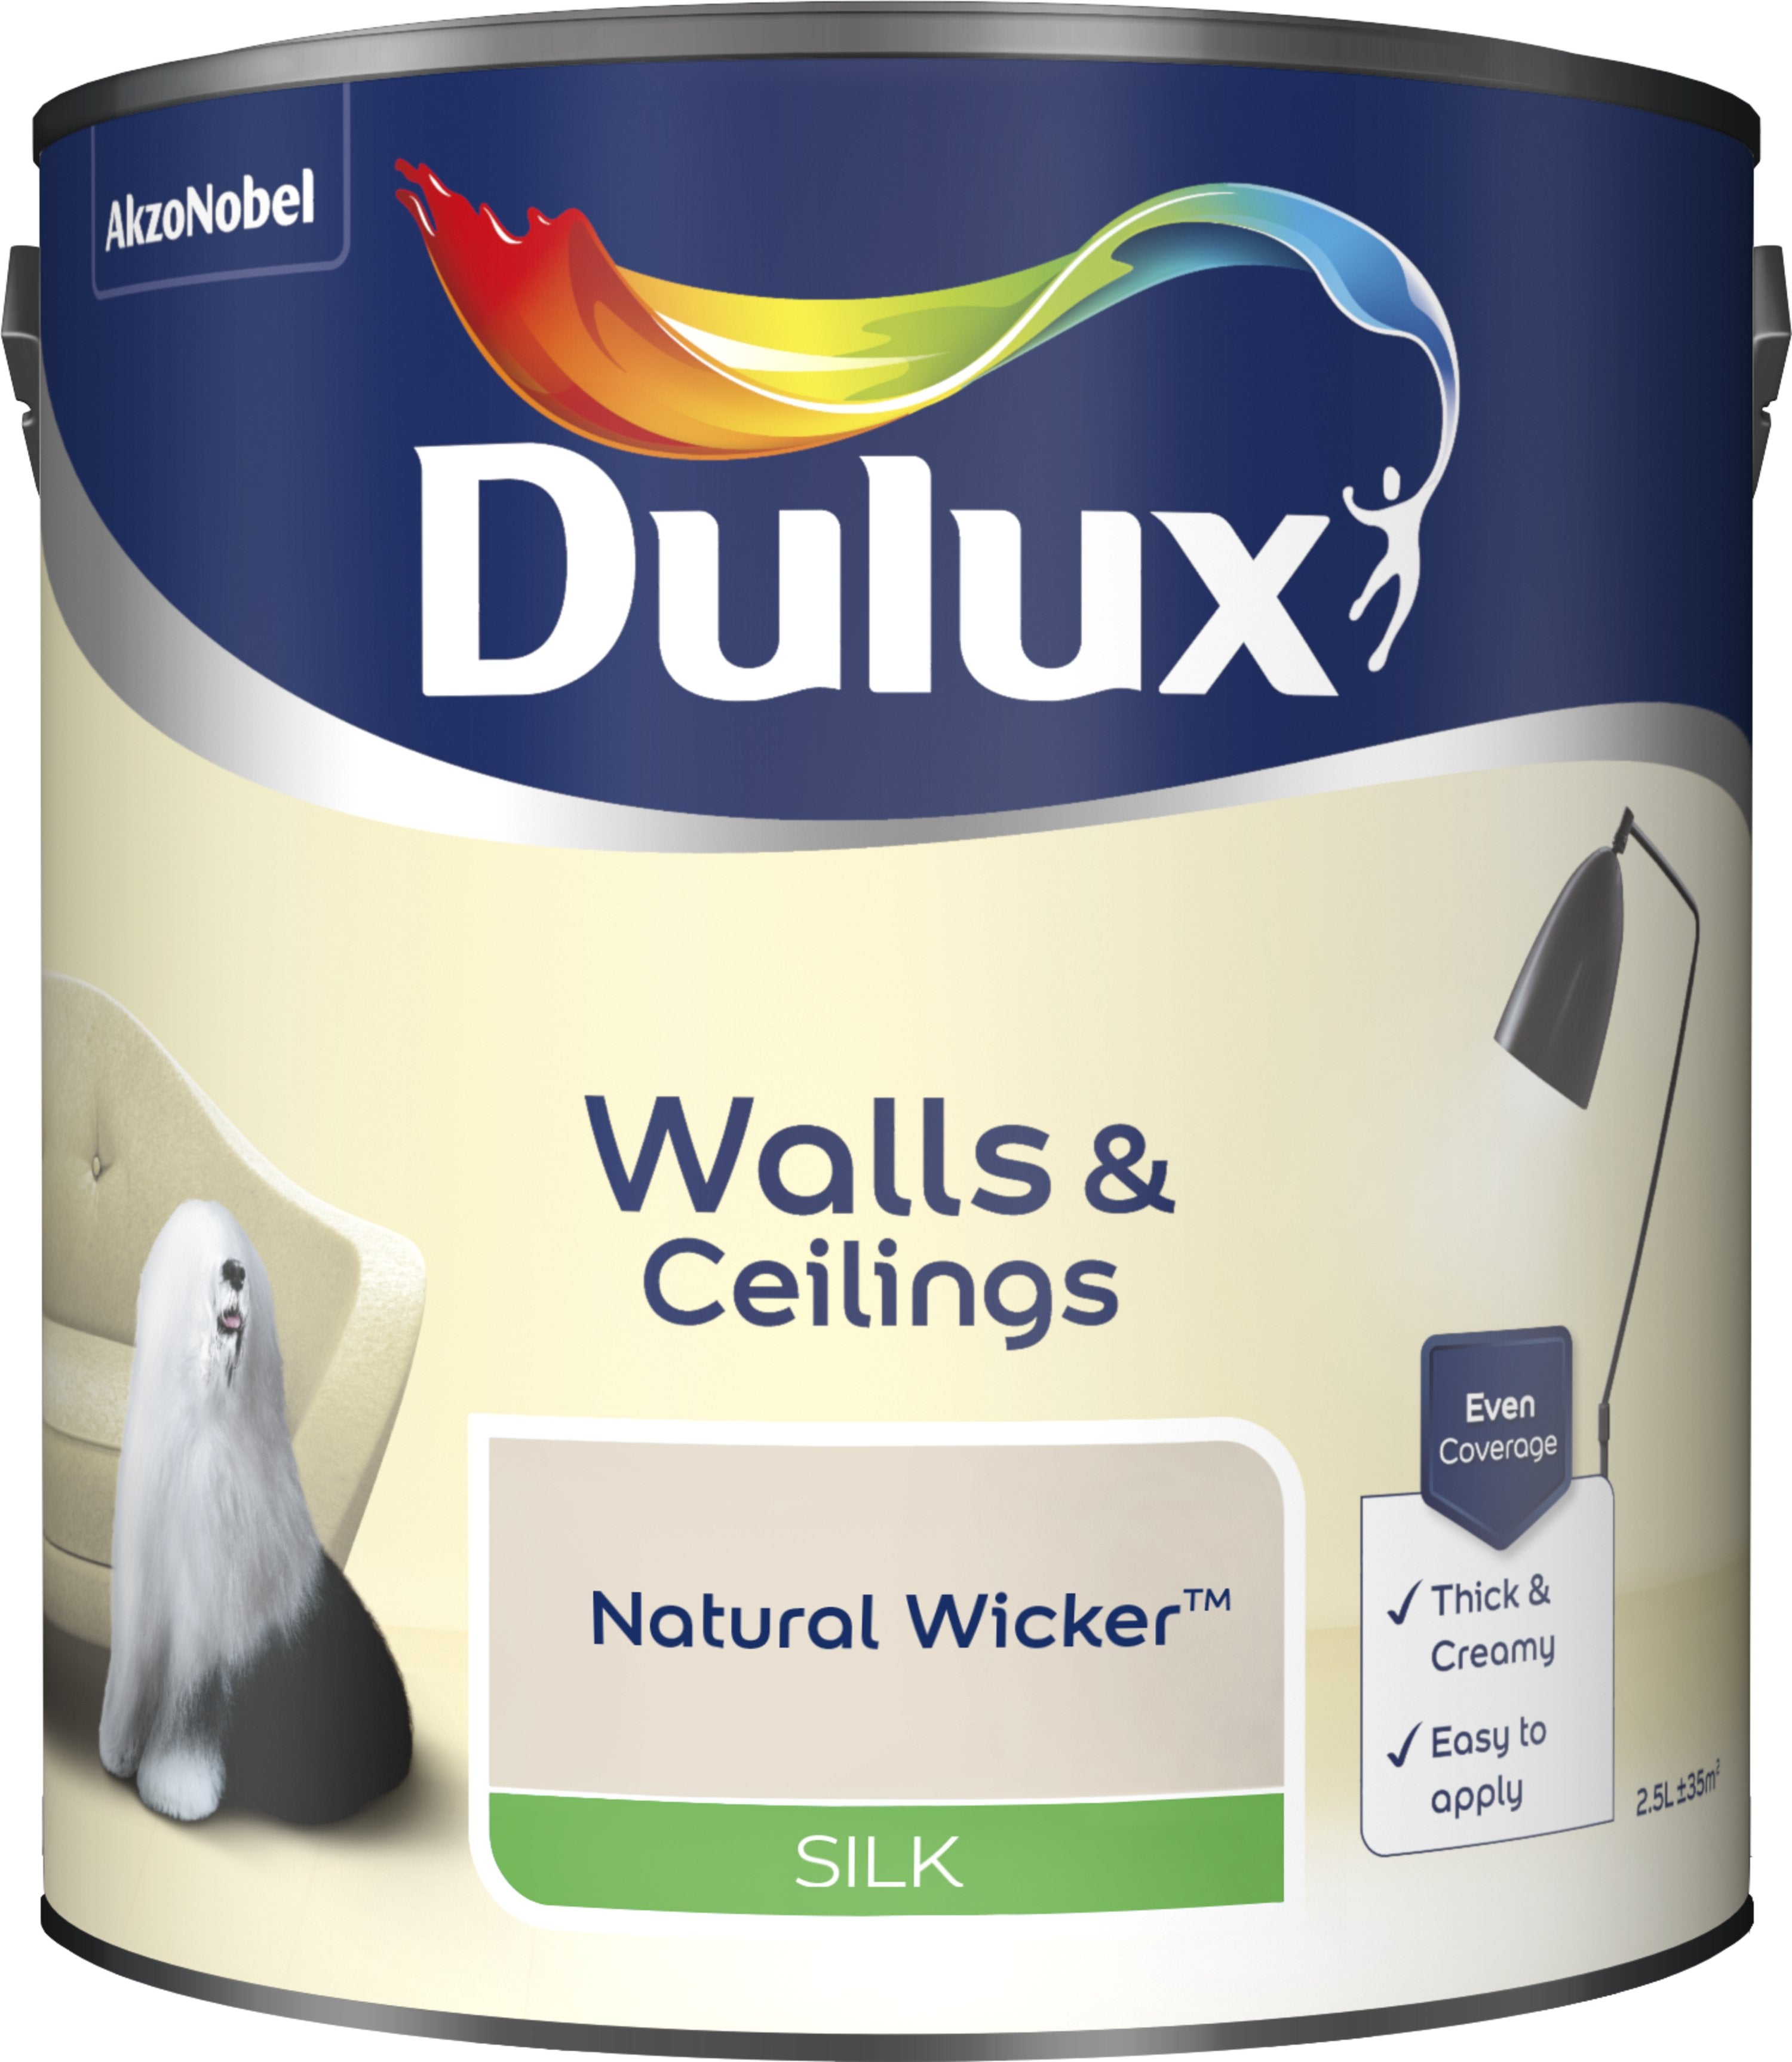 Dulux Silk Emulsion Paint For Walls And Ceilings - Natural Wicker 2.5L Garden & Diy  Home